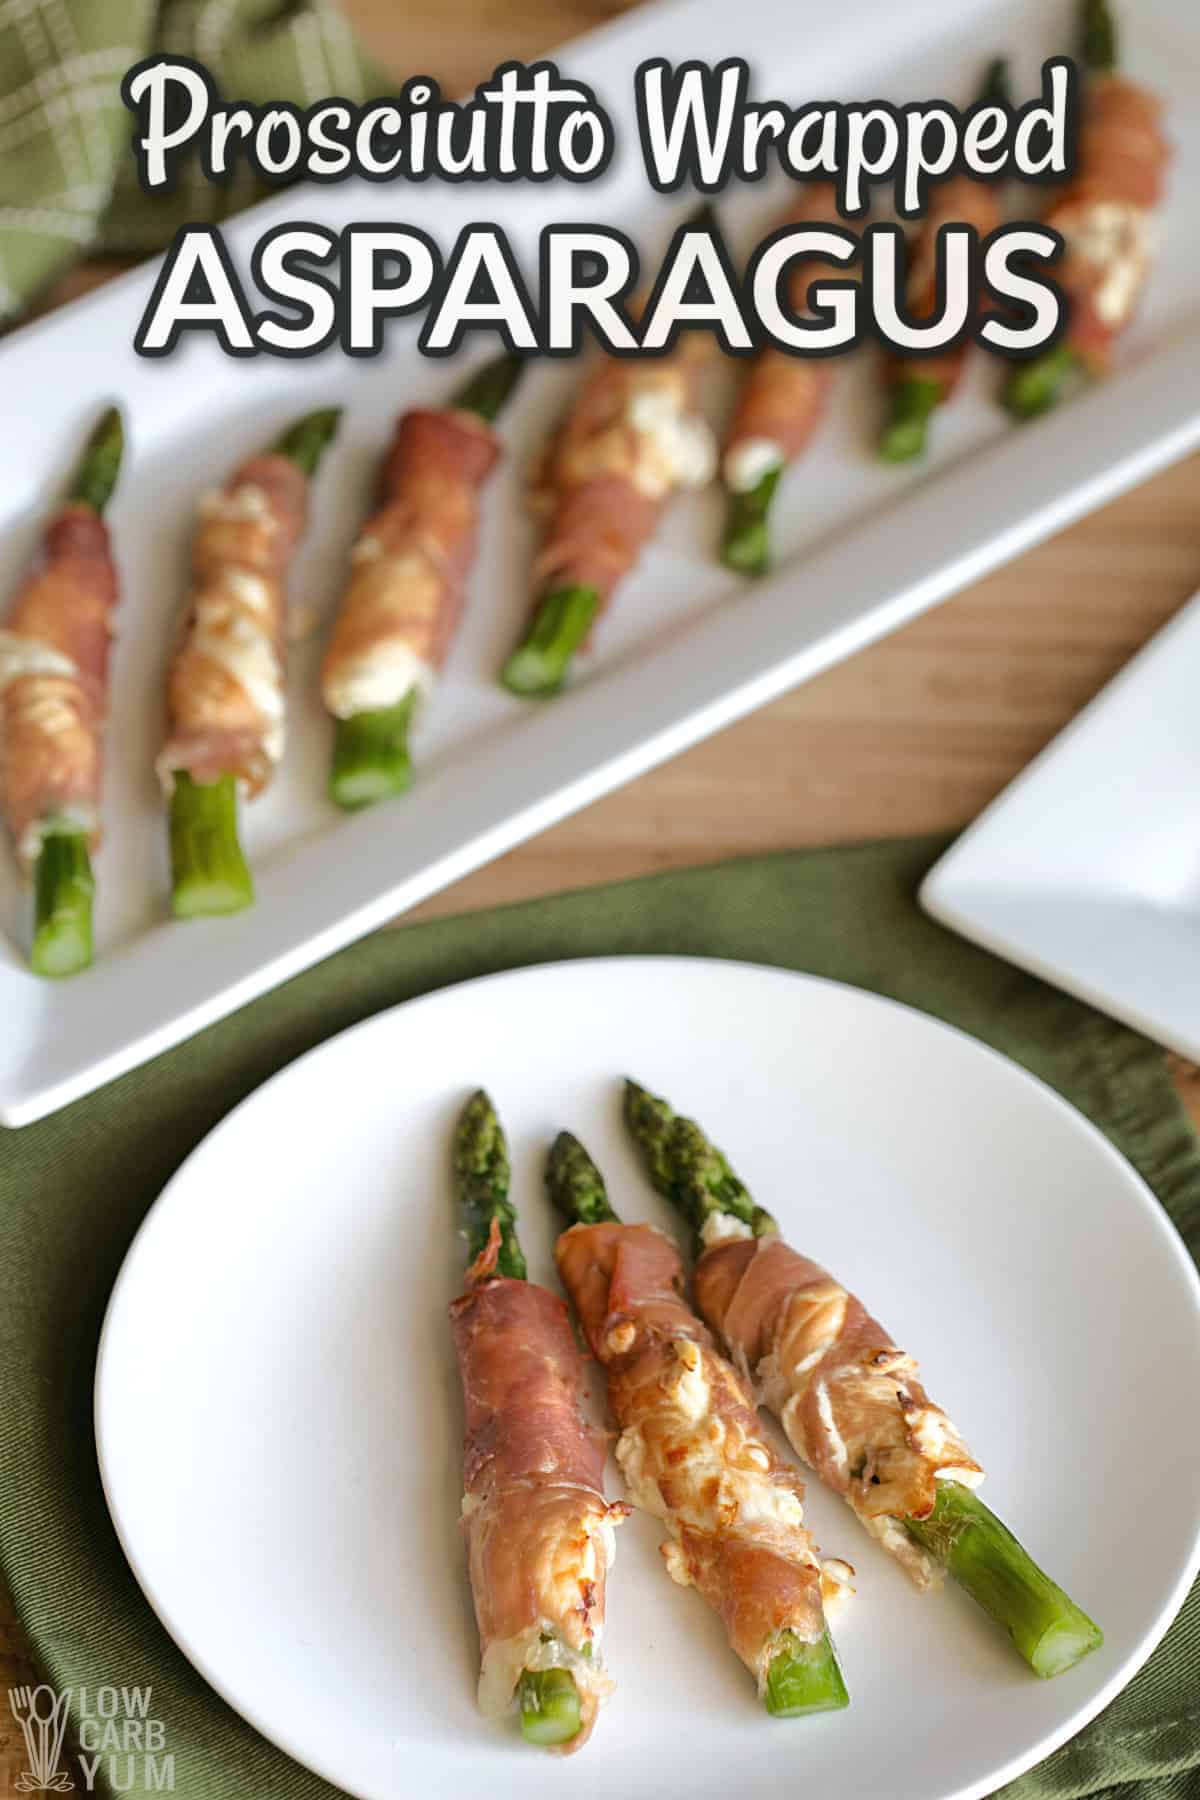 prosciutto wrapped asparagus with text overlay.